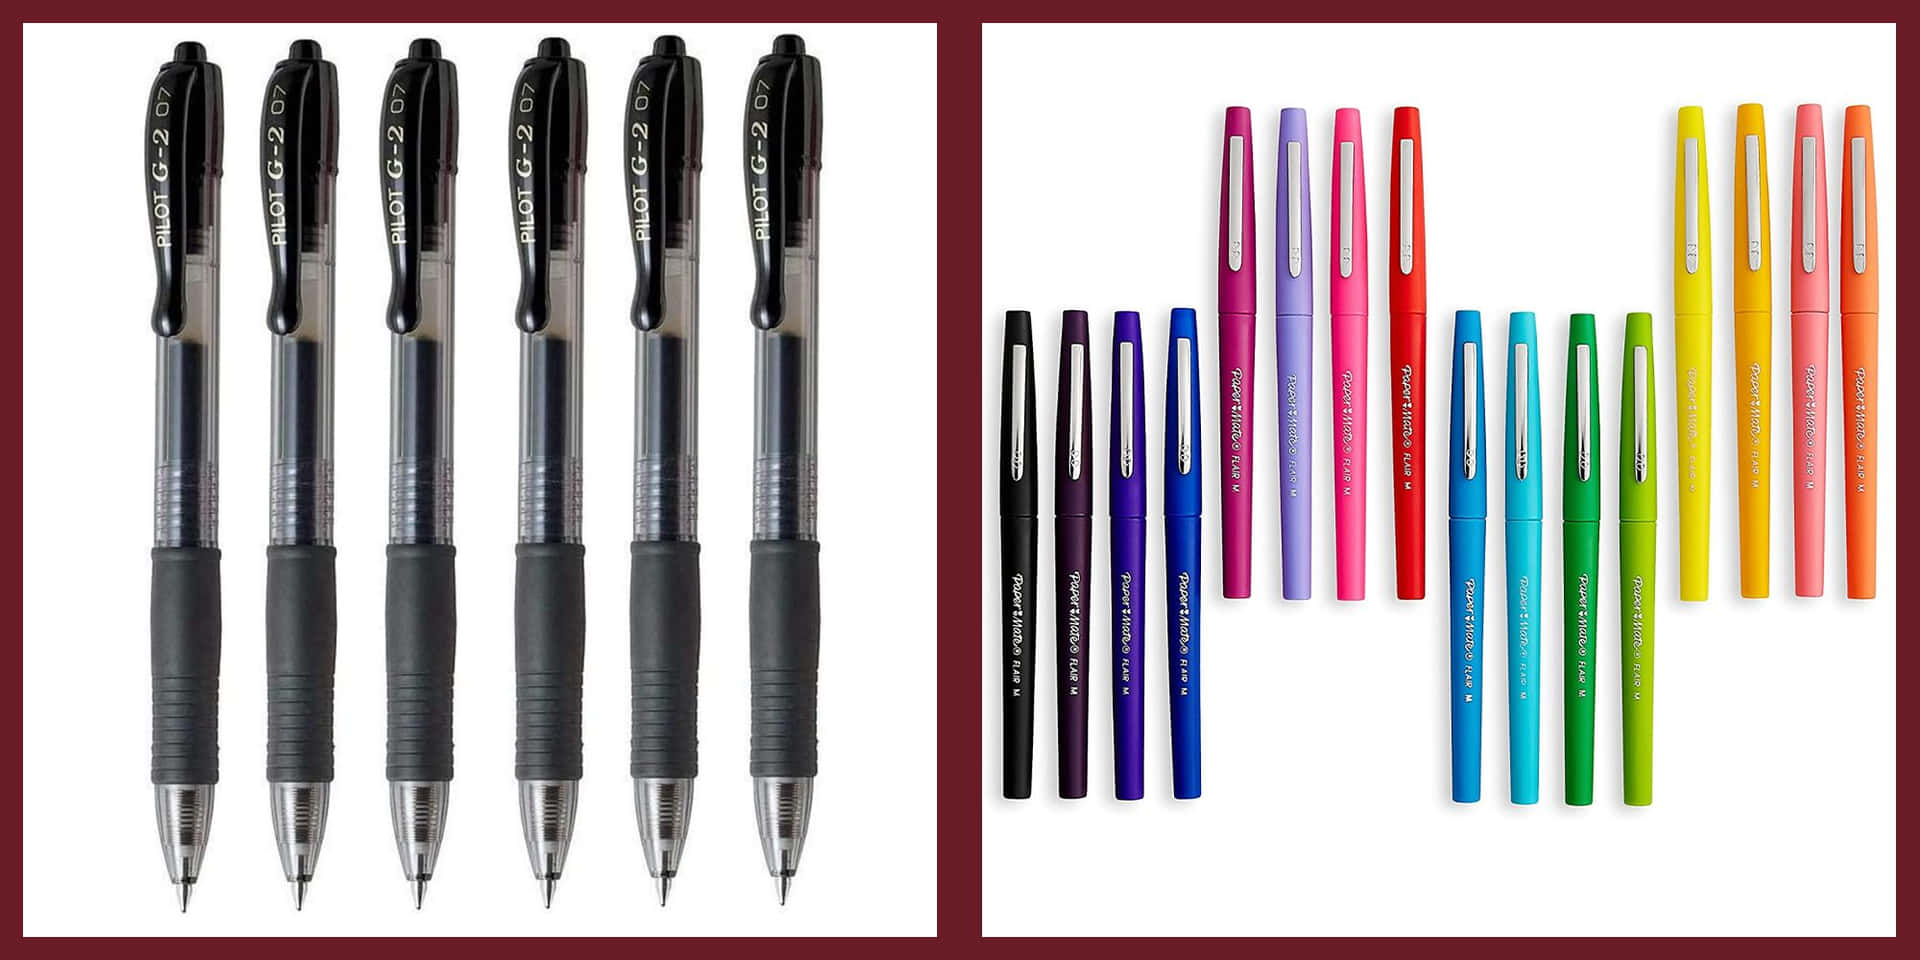 A Variety Of Pens And Pencils Are Shown